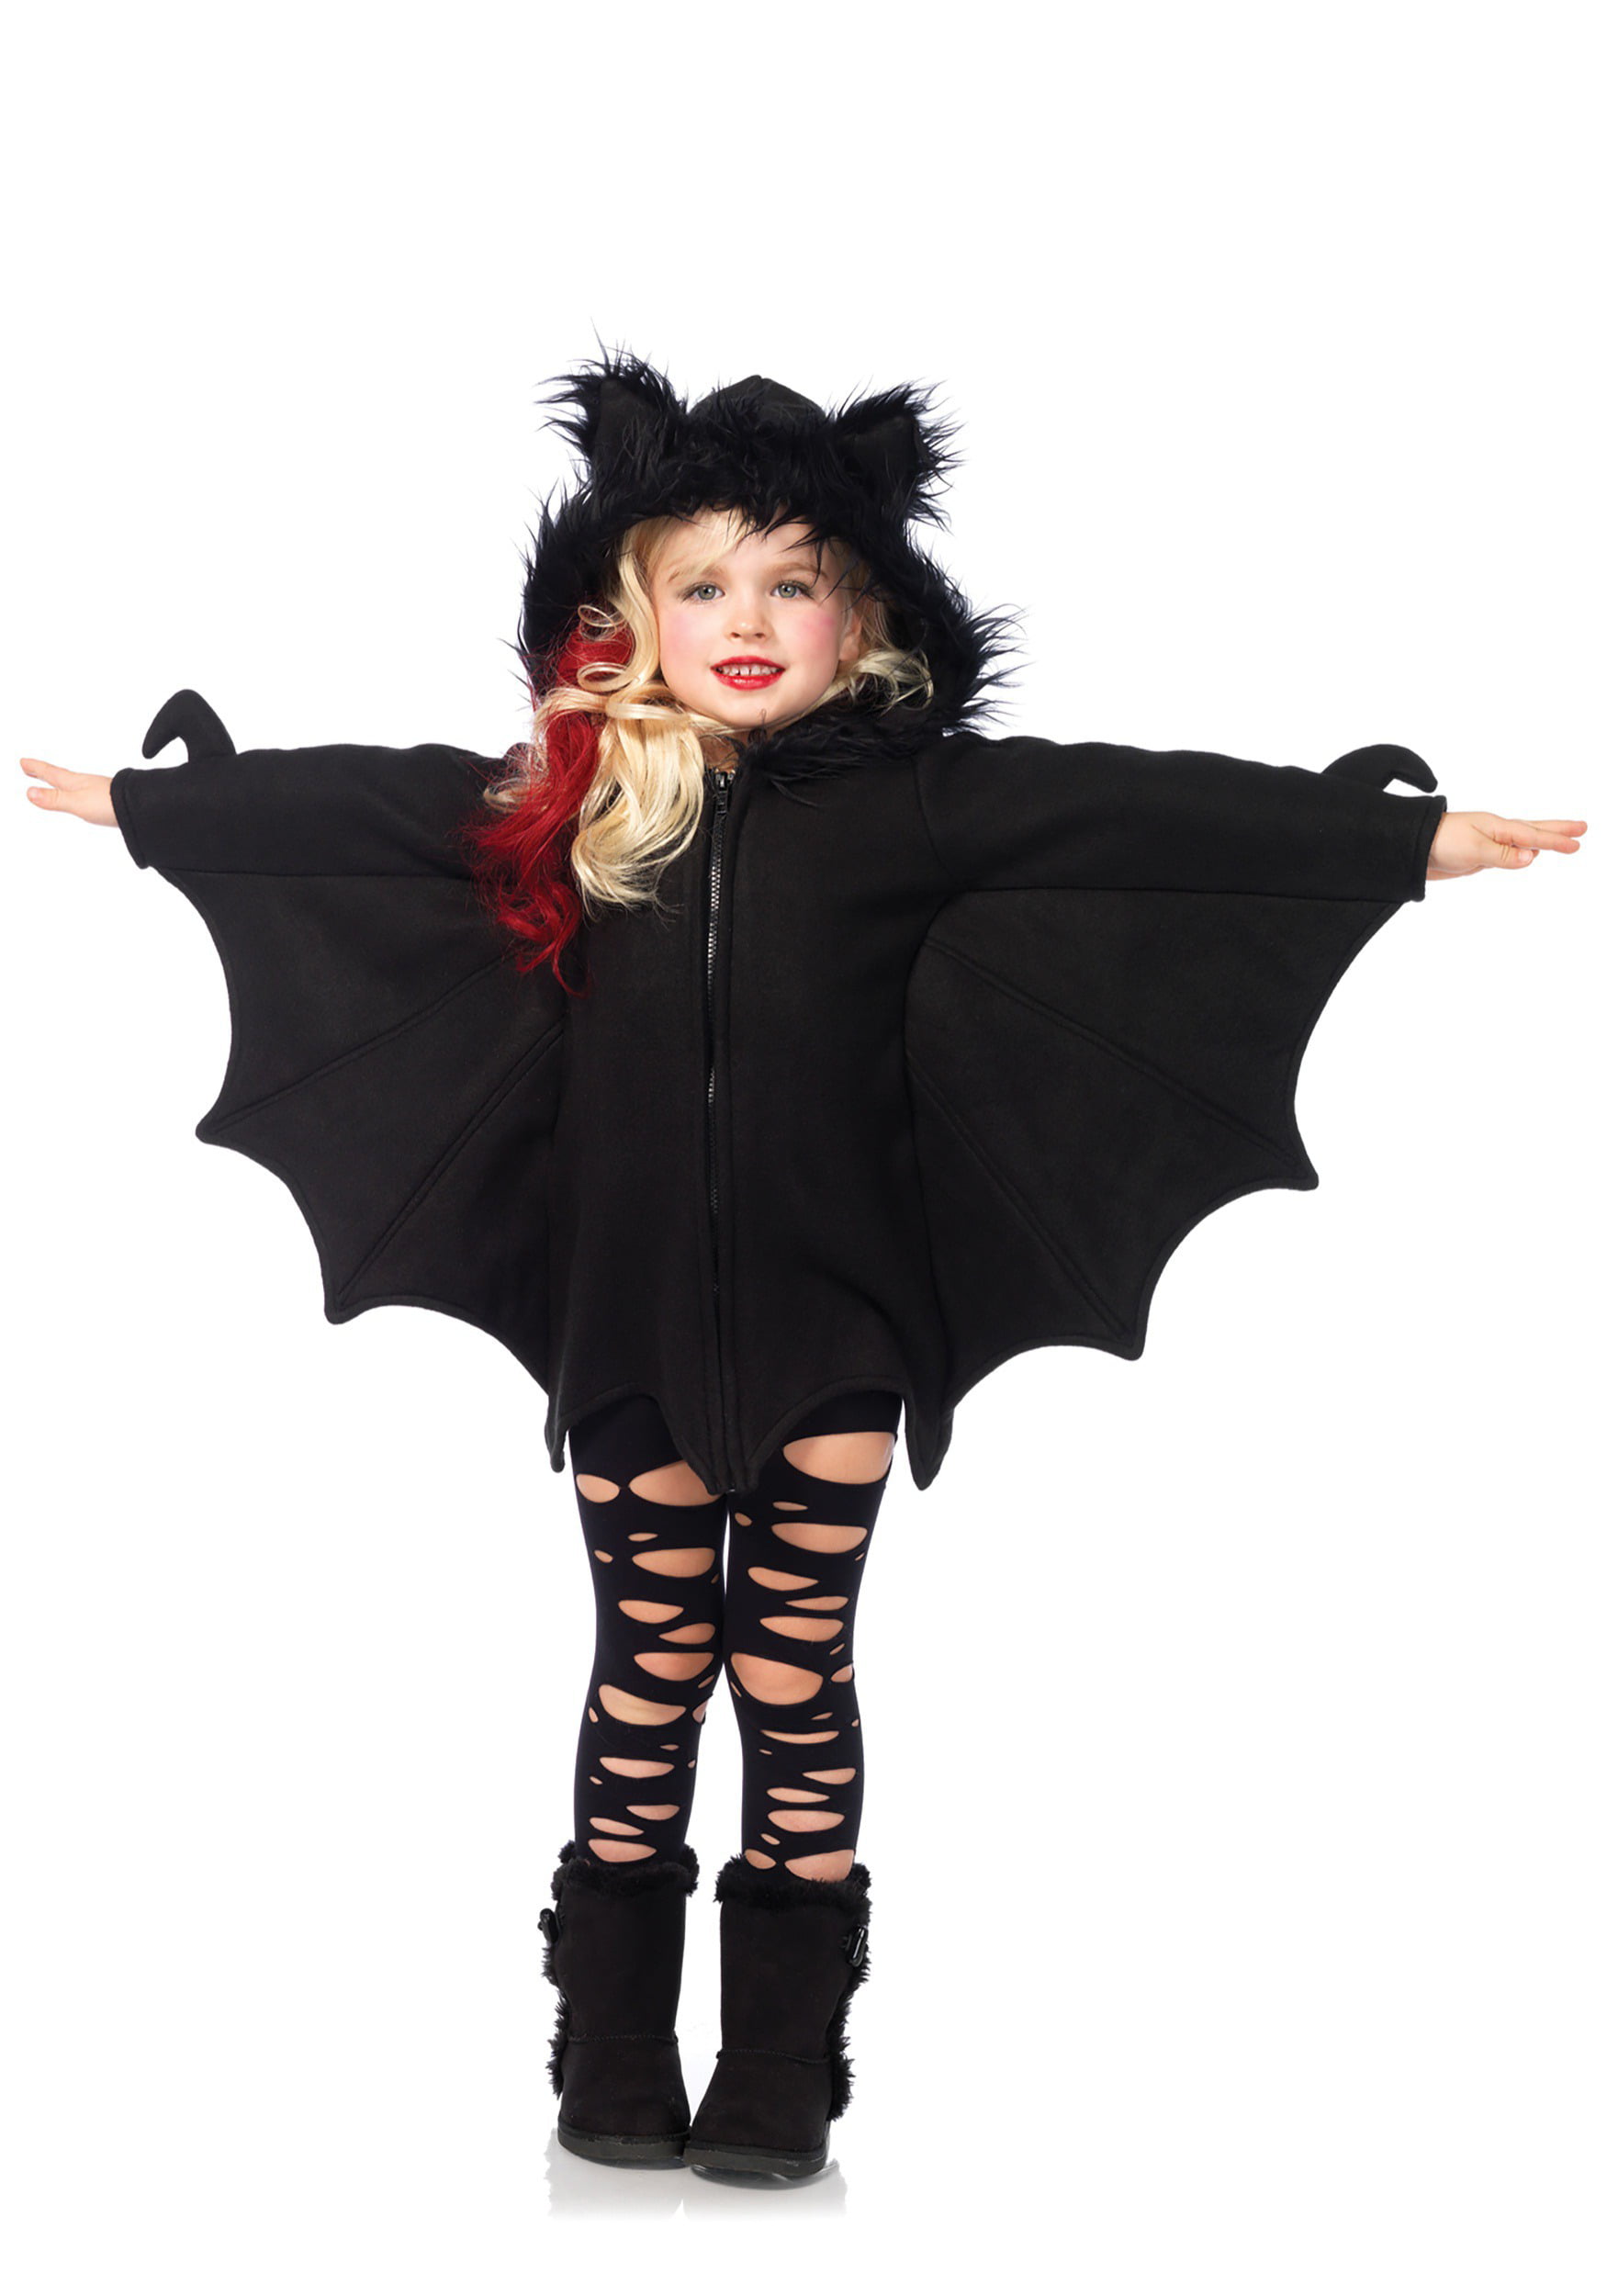 New Toddler Girls Bat Costume Hoodie Jacket Size 24 Mo or 2T-BAT with WINGS 